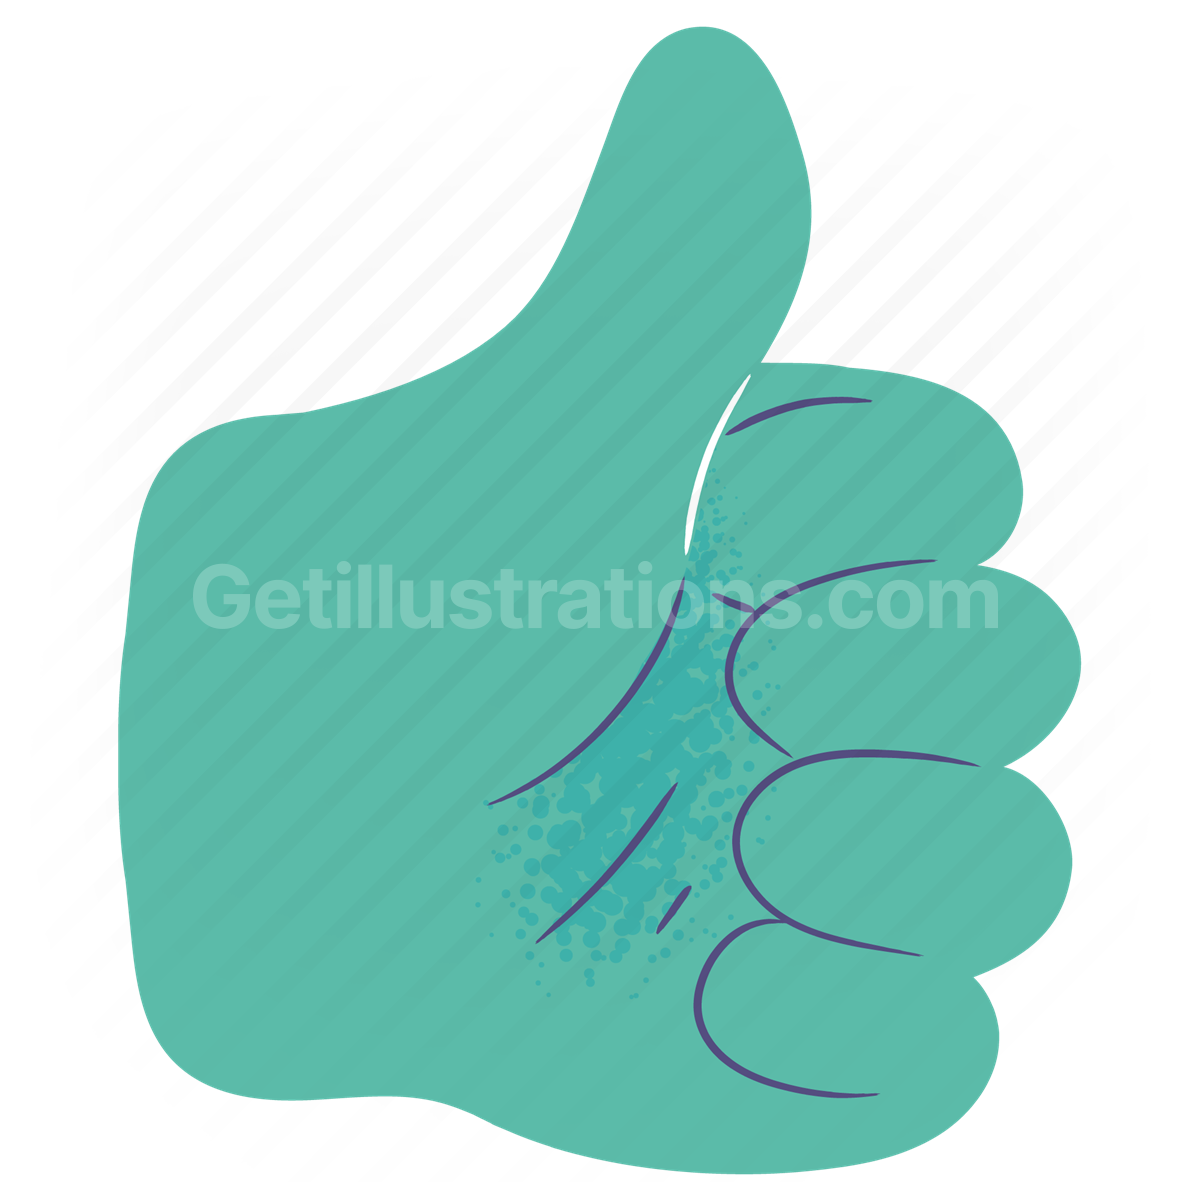 hand gesture, gesture, hand, sign, language, letters, alphabet, thumbs up